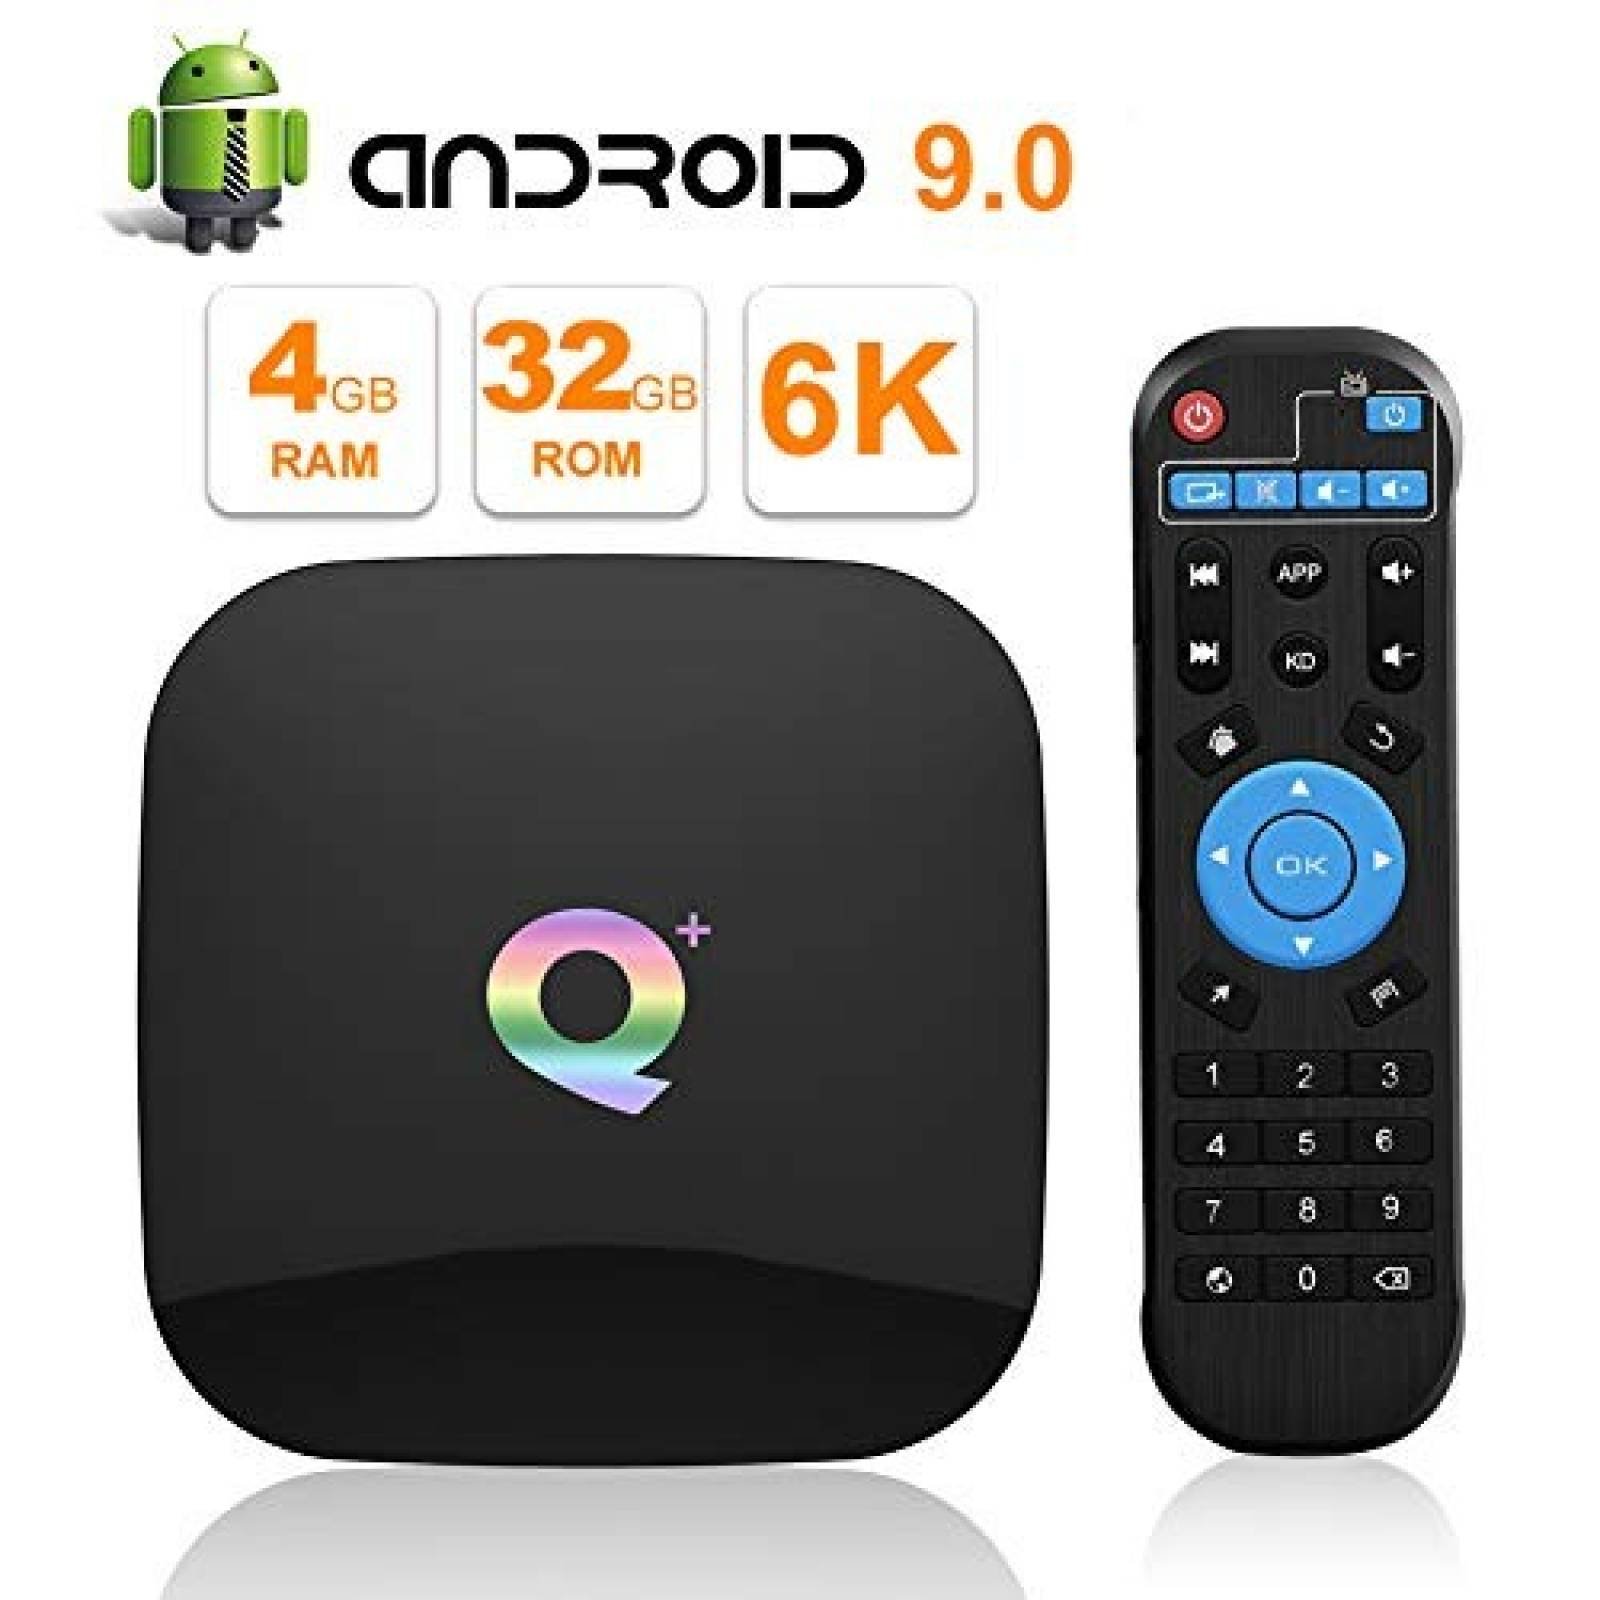 Reproductor multimedia streaming EVER EXPRESS 4GB 32GB ROM